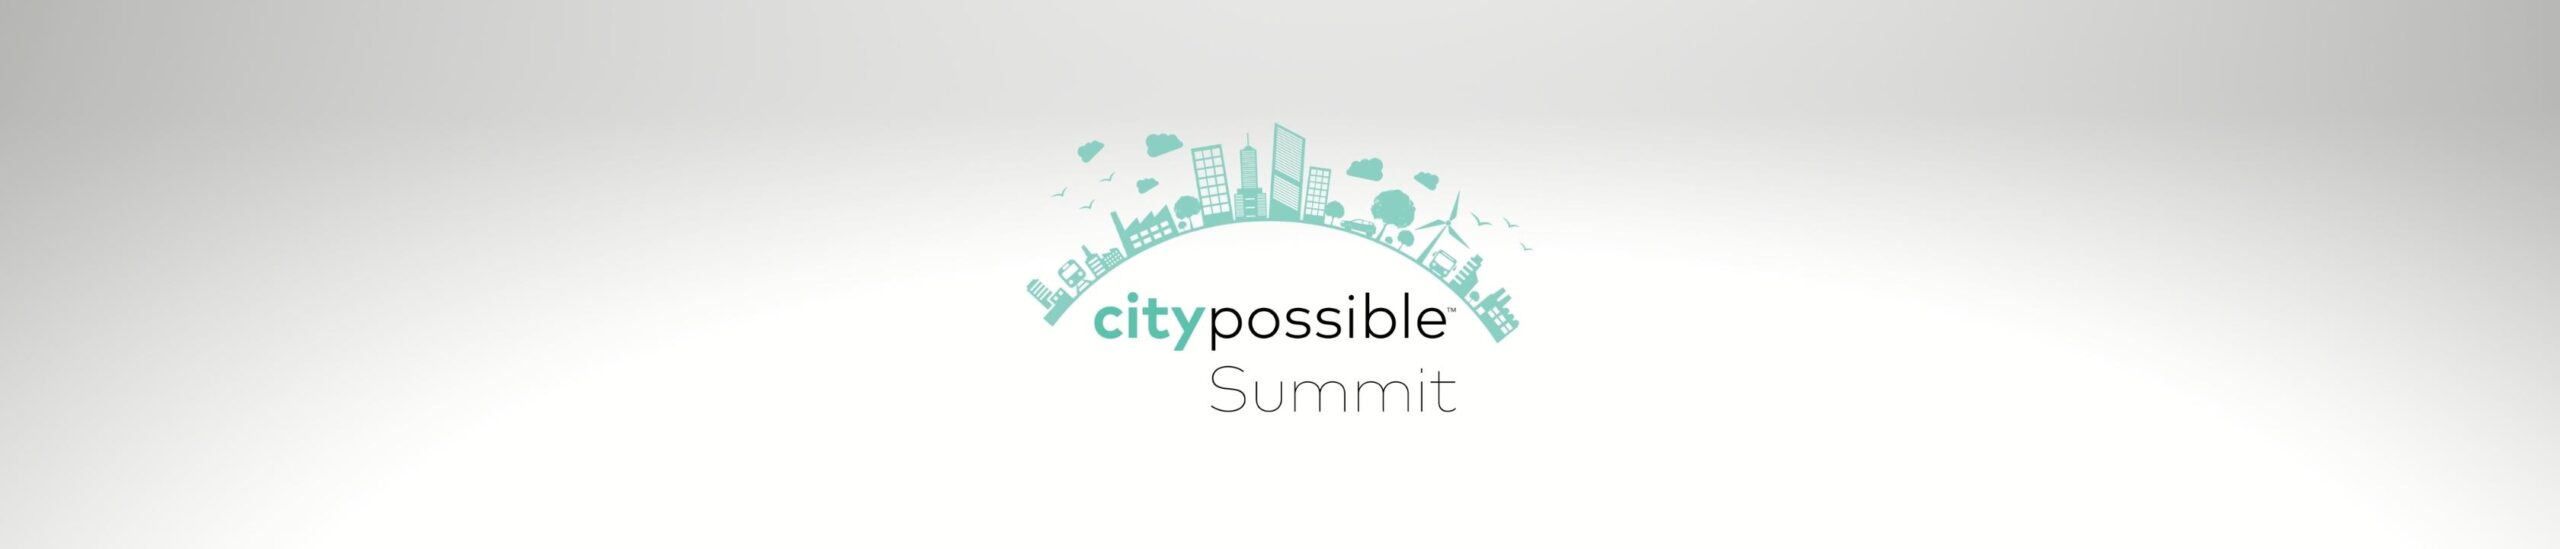 City Possible Summit 2021. Partnering for the City of Tomorrow